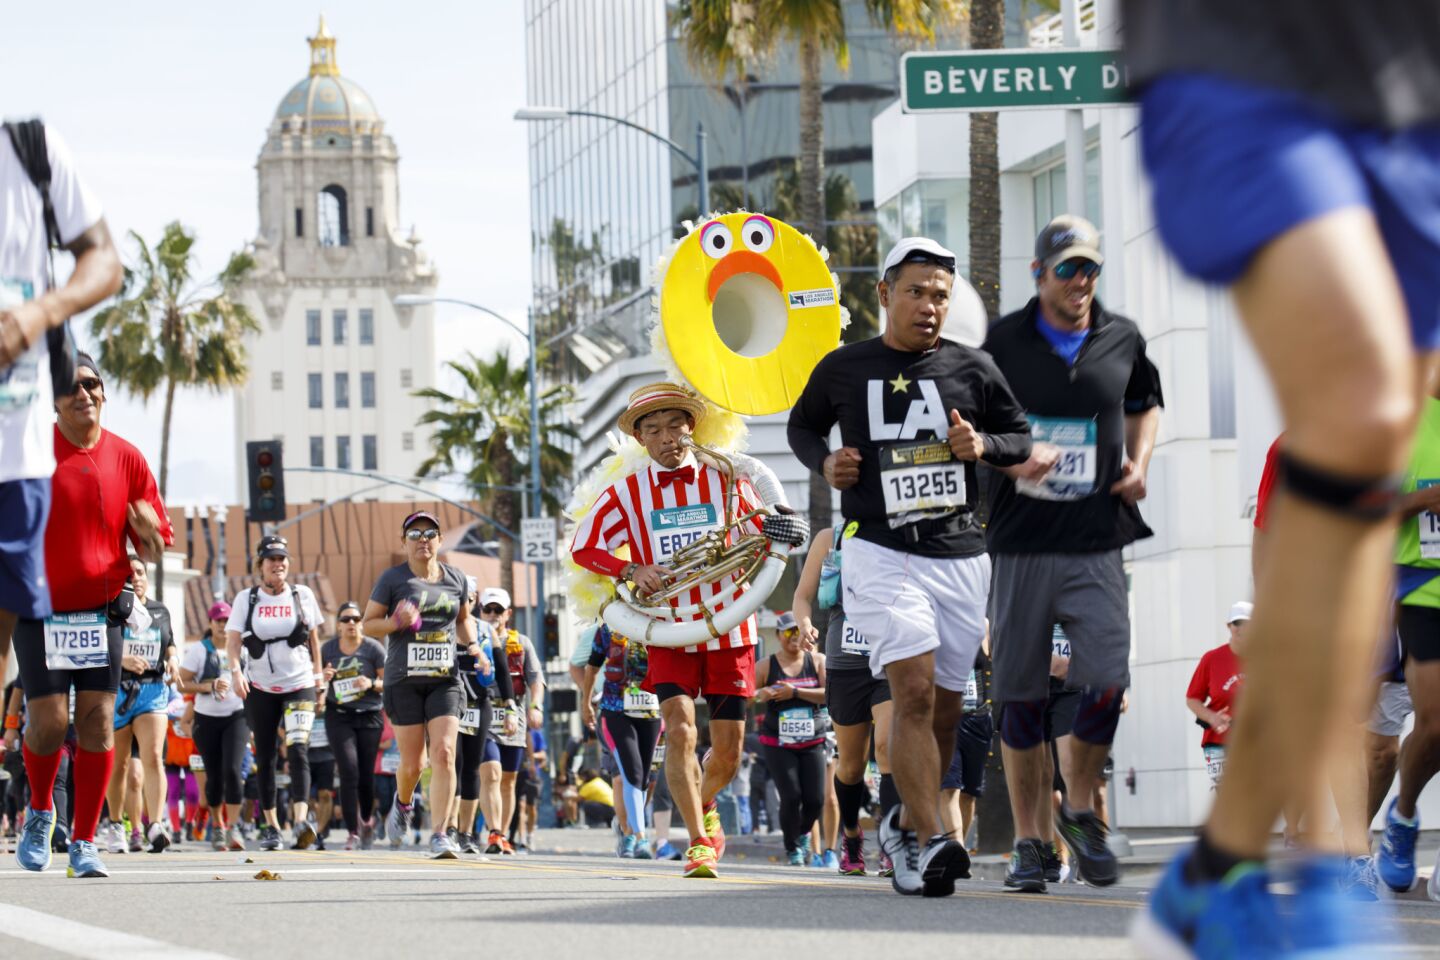 A runner carrying a tuba makes his way down Santa Monica Blvd at mile 17 of the L.A. Marathon in Beverly Hills.